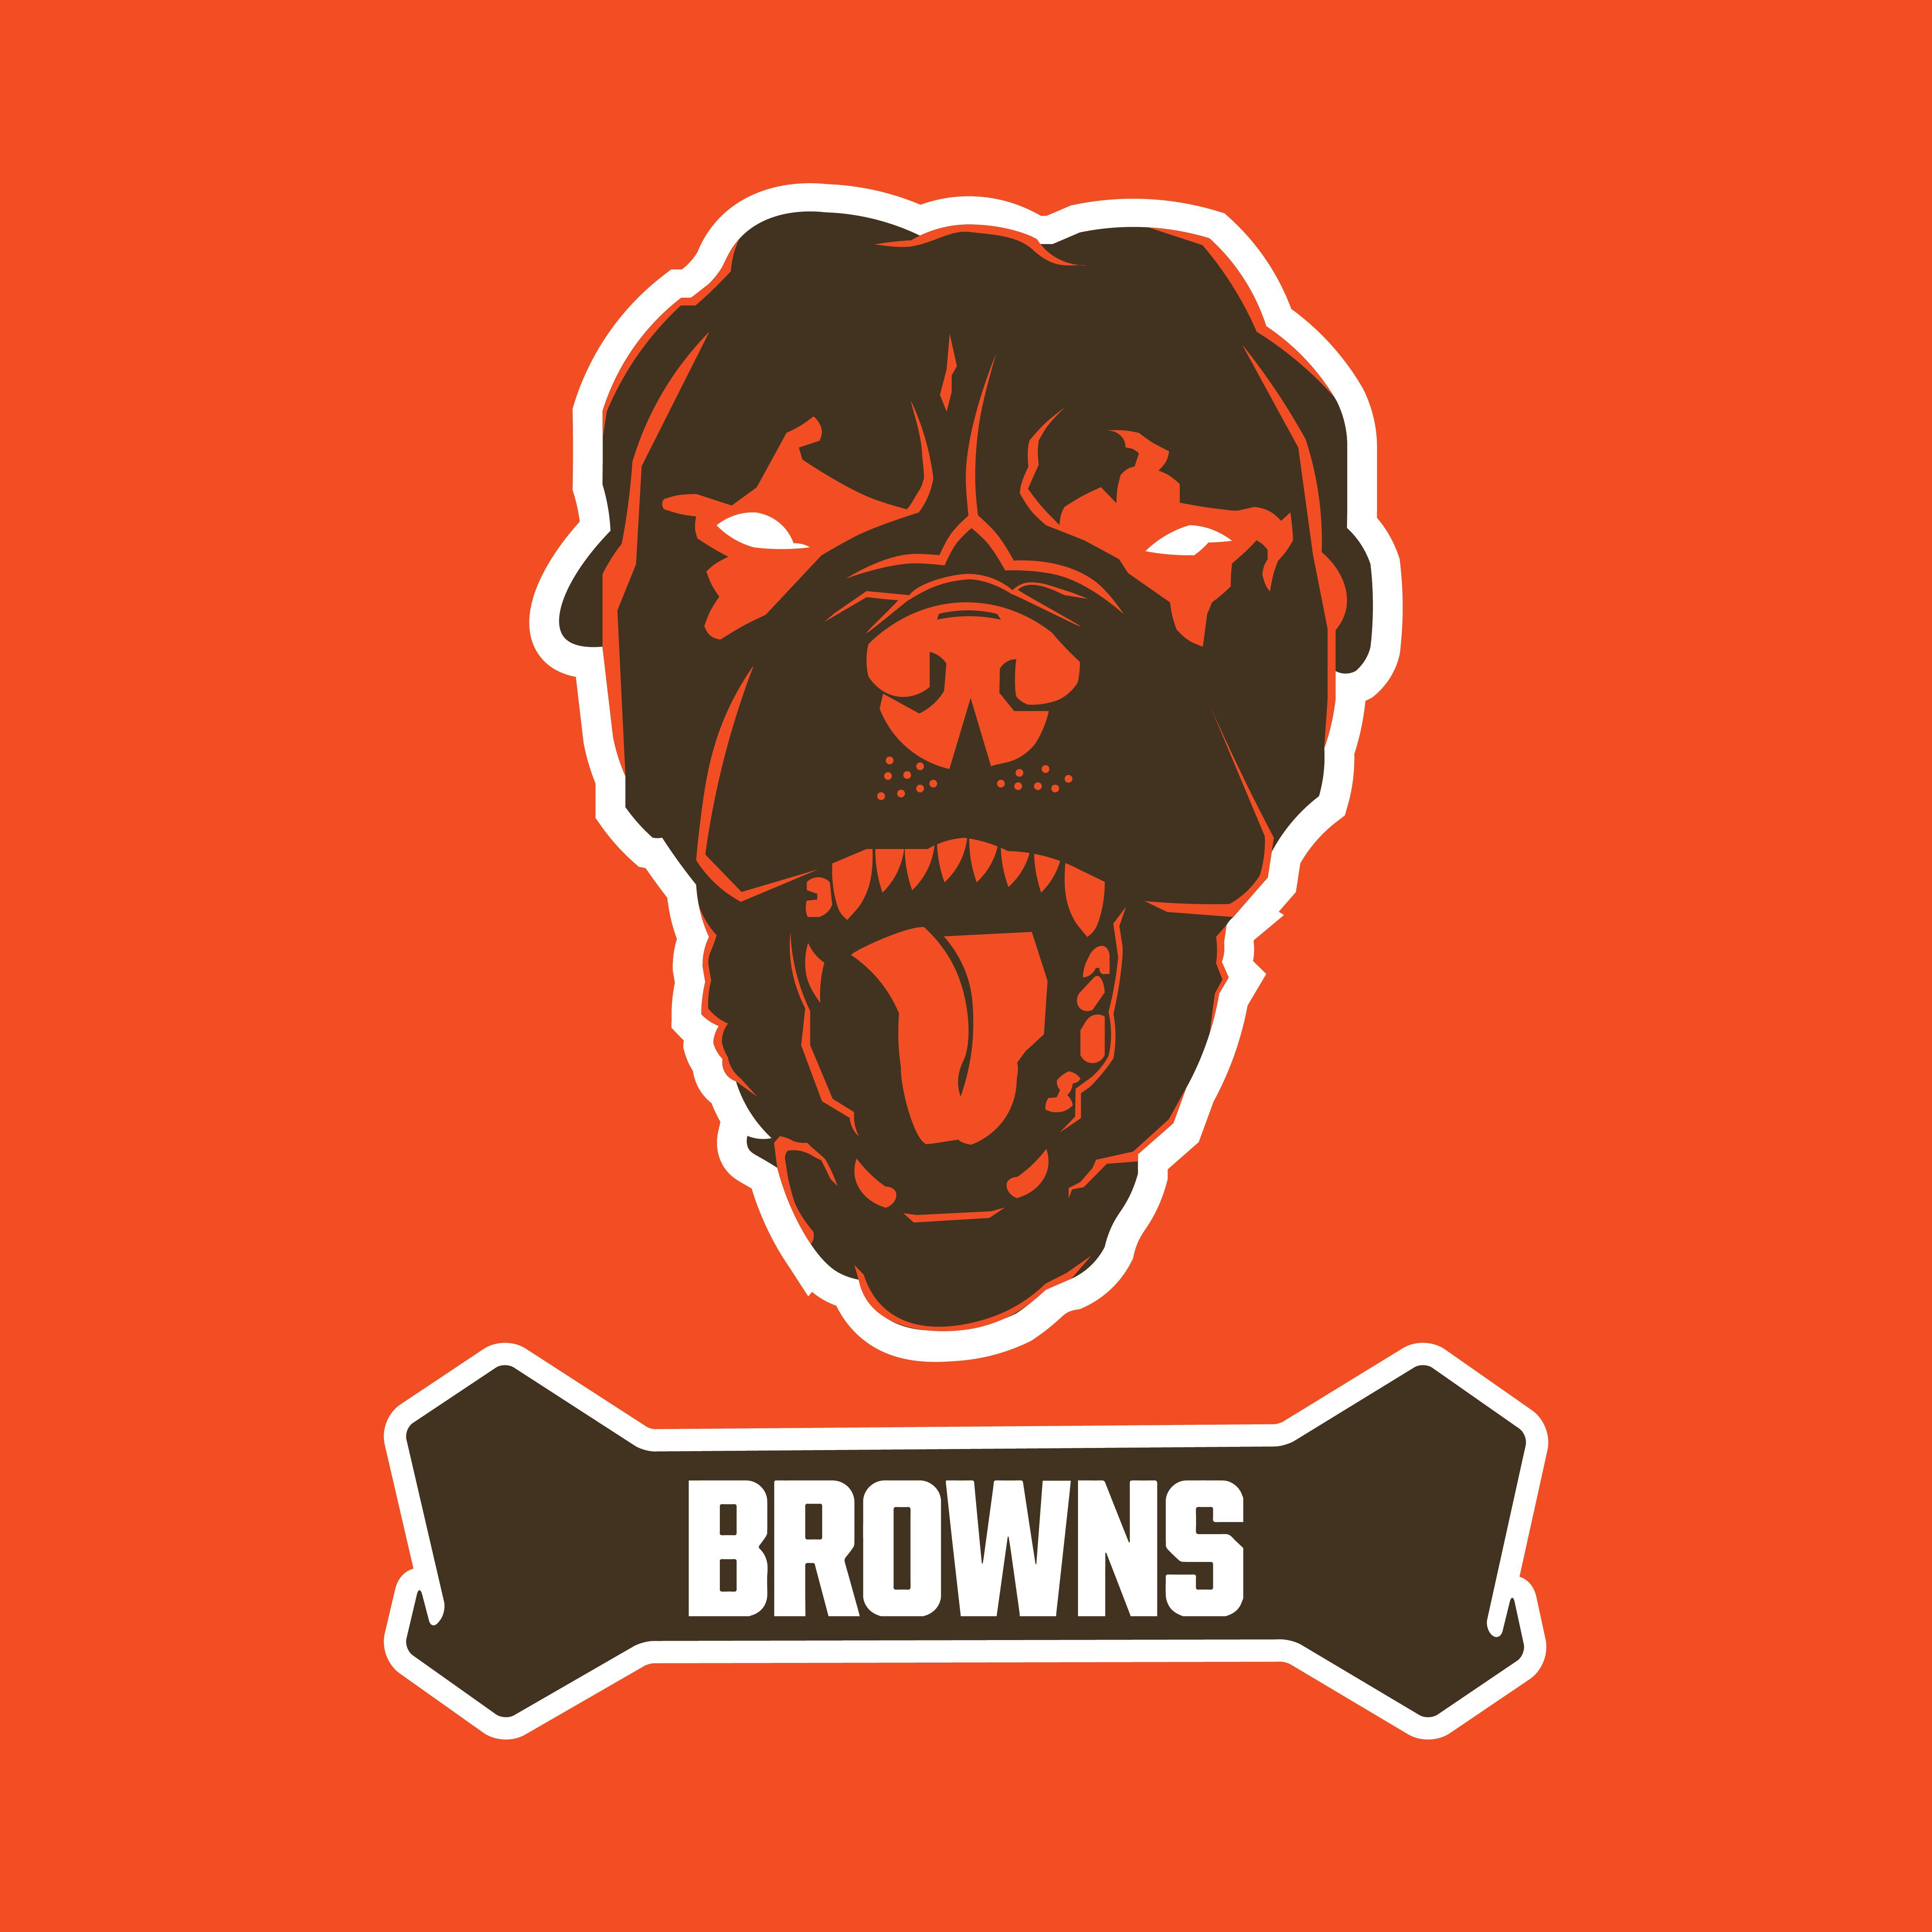 Cleveland Browns concept logo (just for fun)